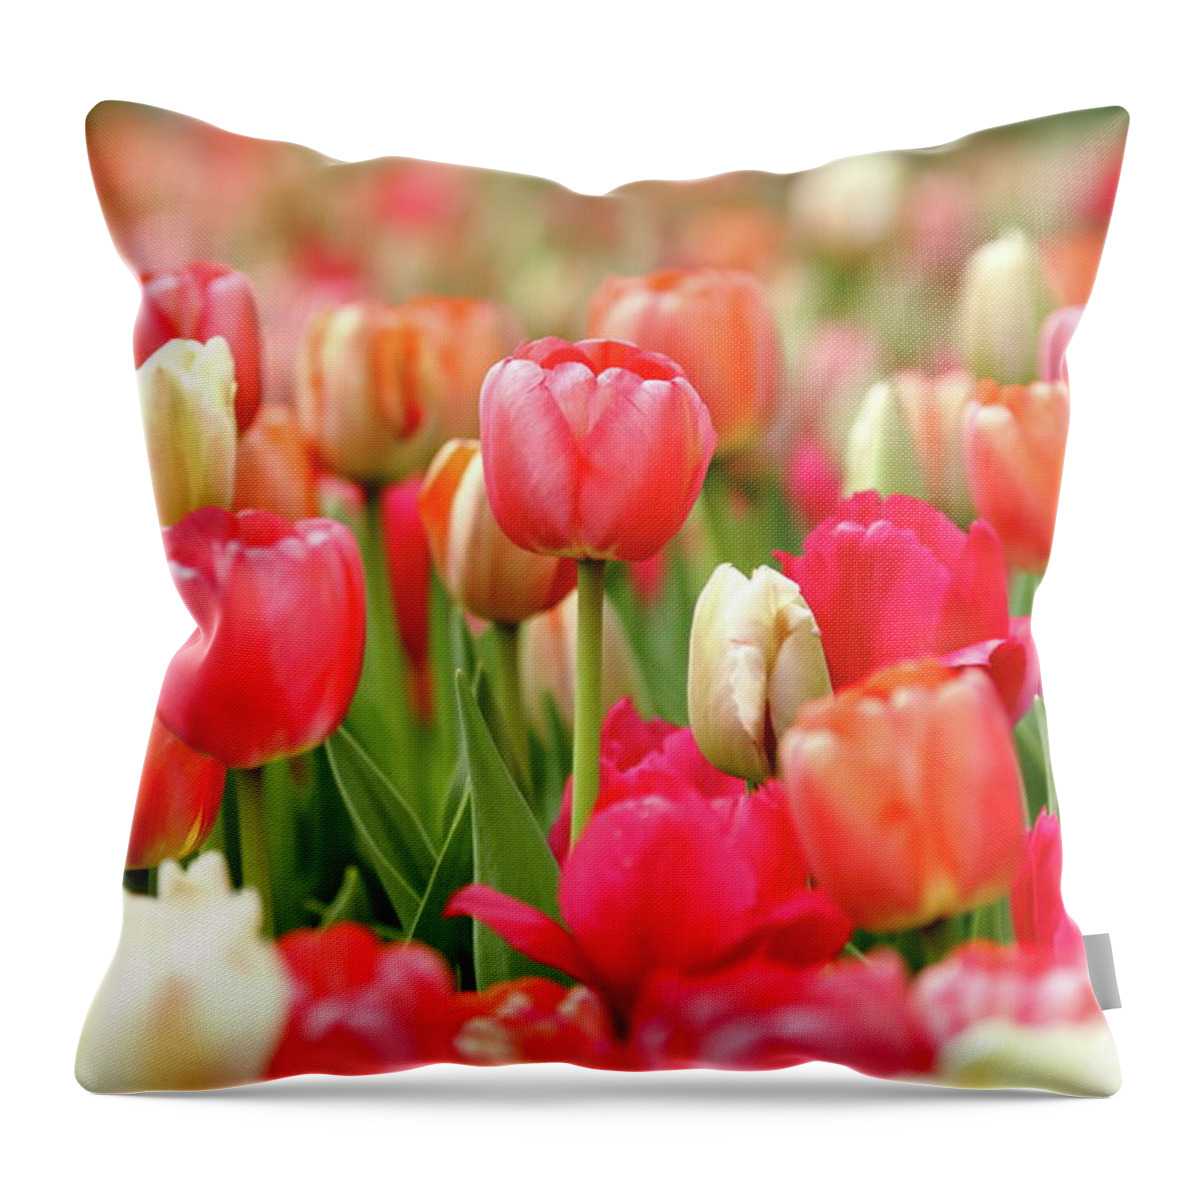 Nature Throw Pillow featuring the photograph Delicate by Lens Art Photography By Larry Trager